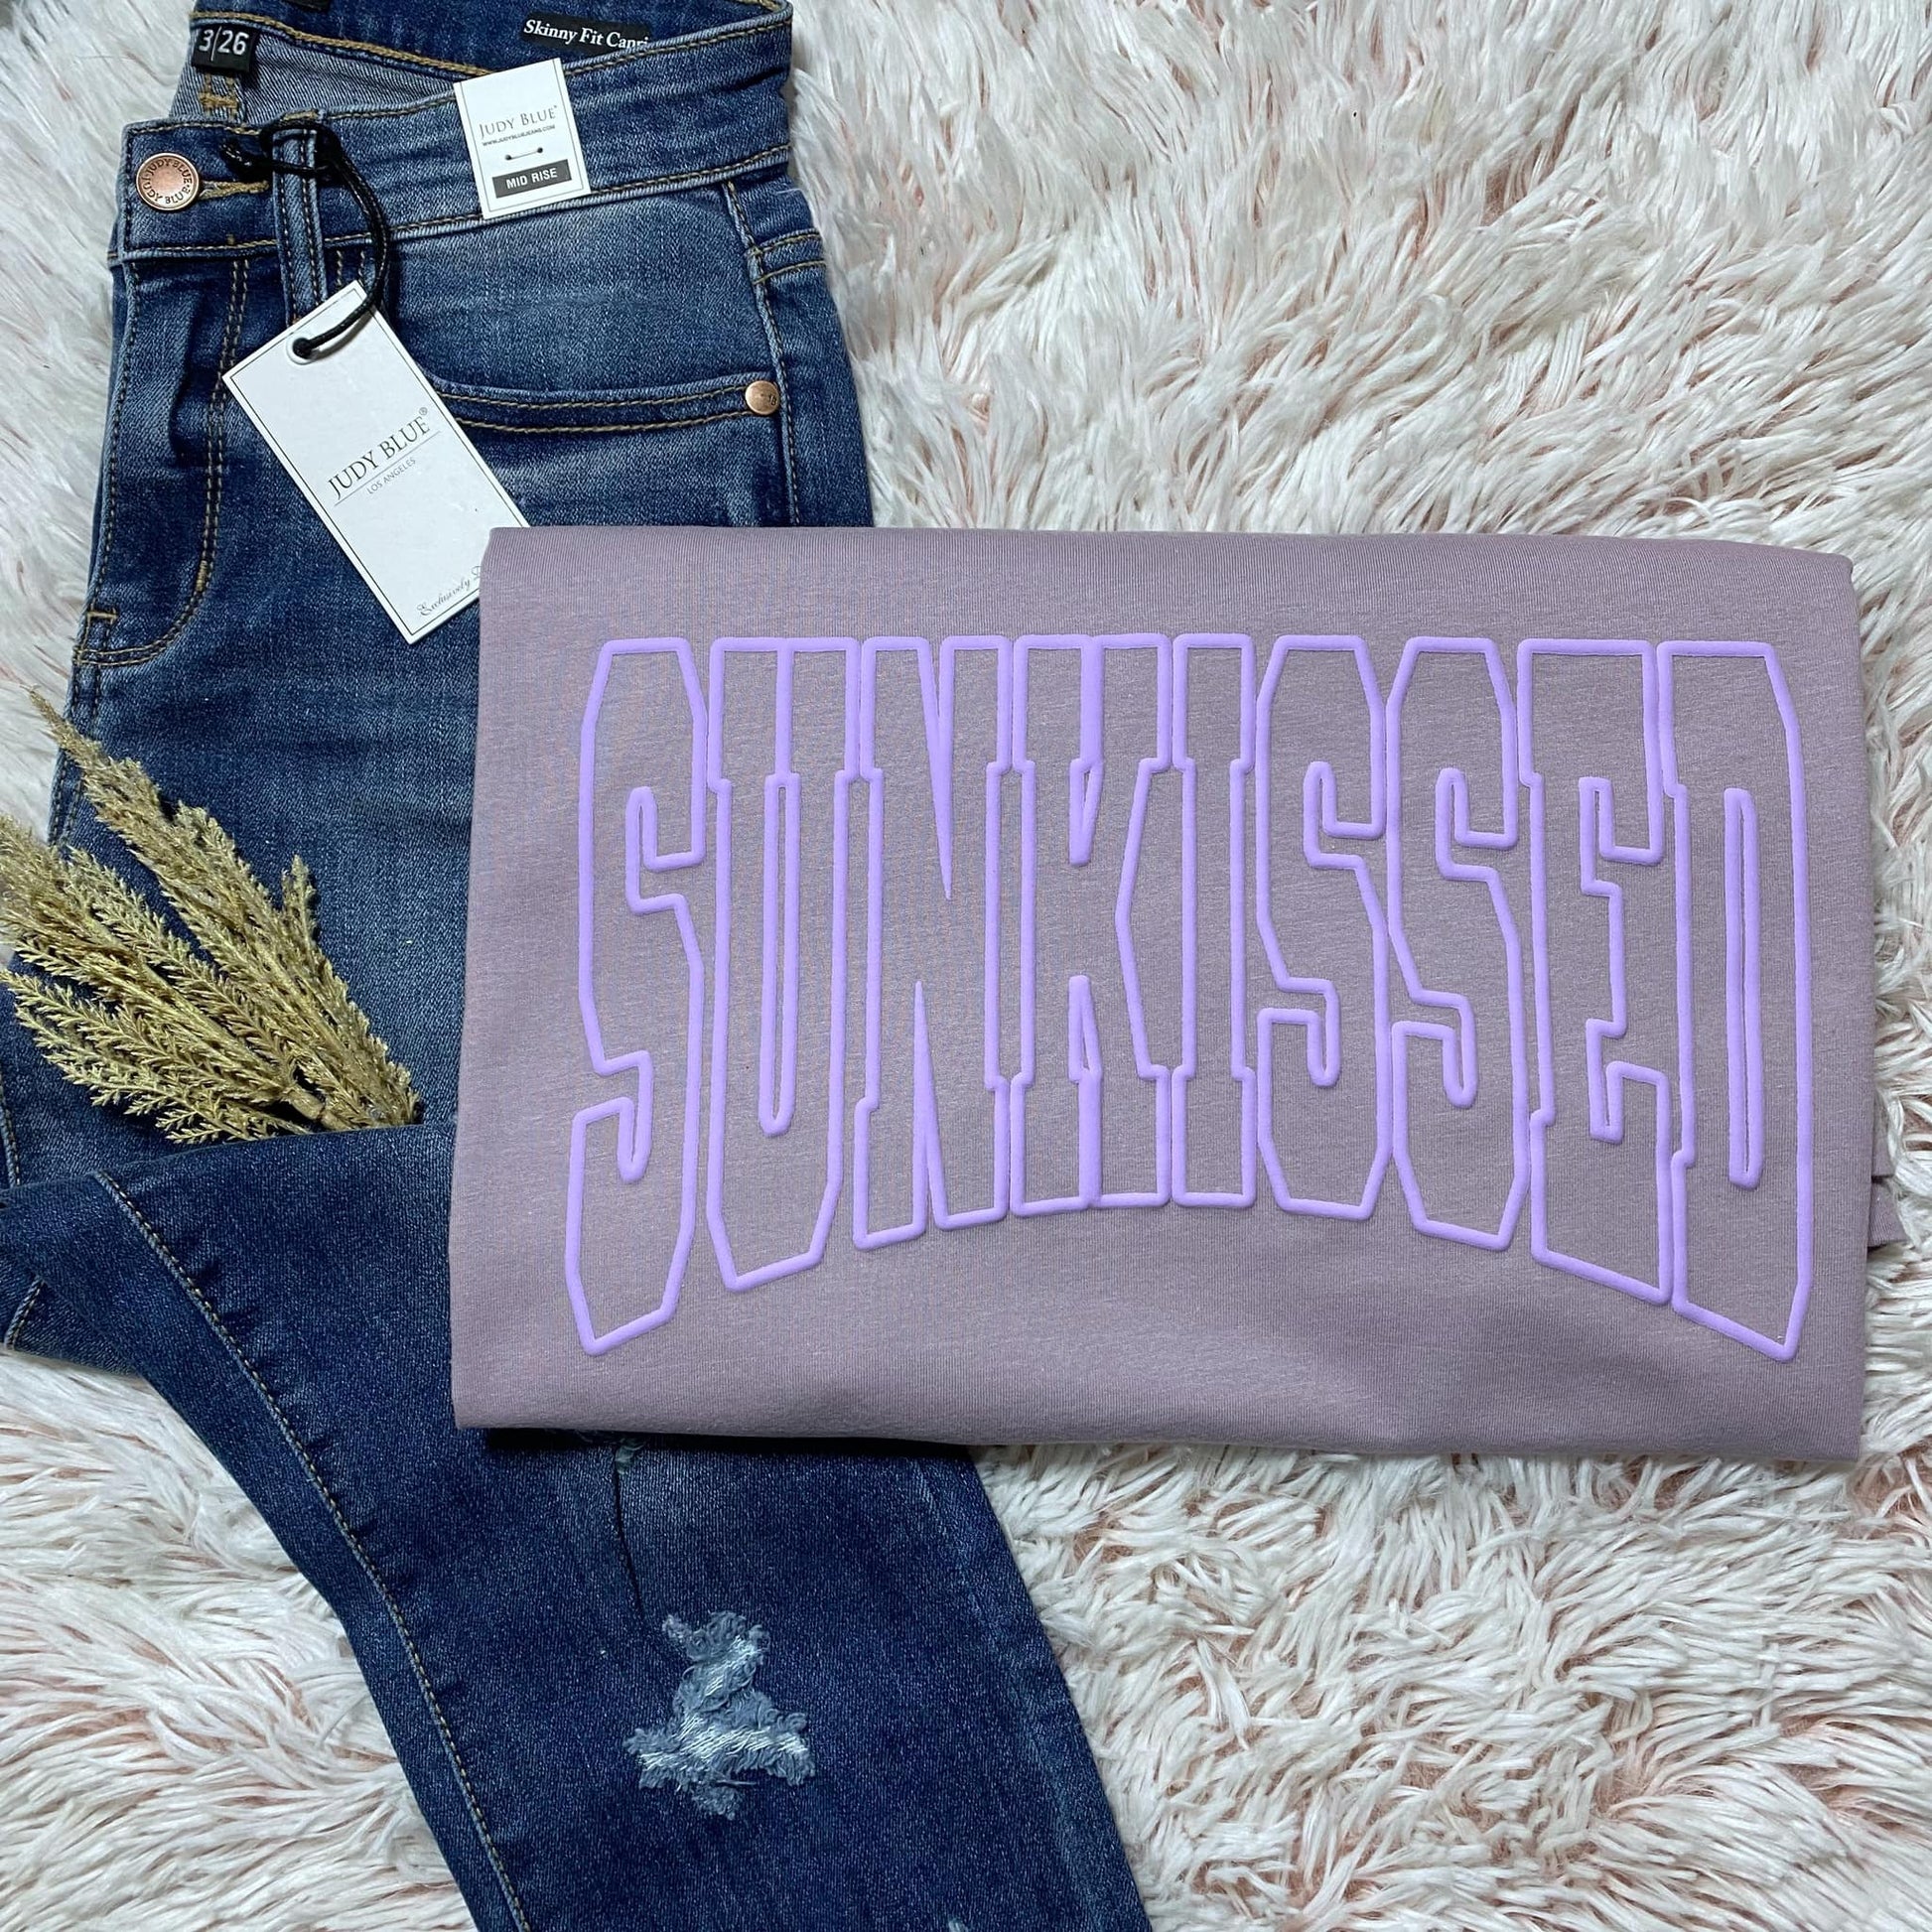 Sunkissed - FamFancy Boutique